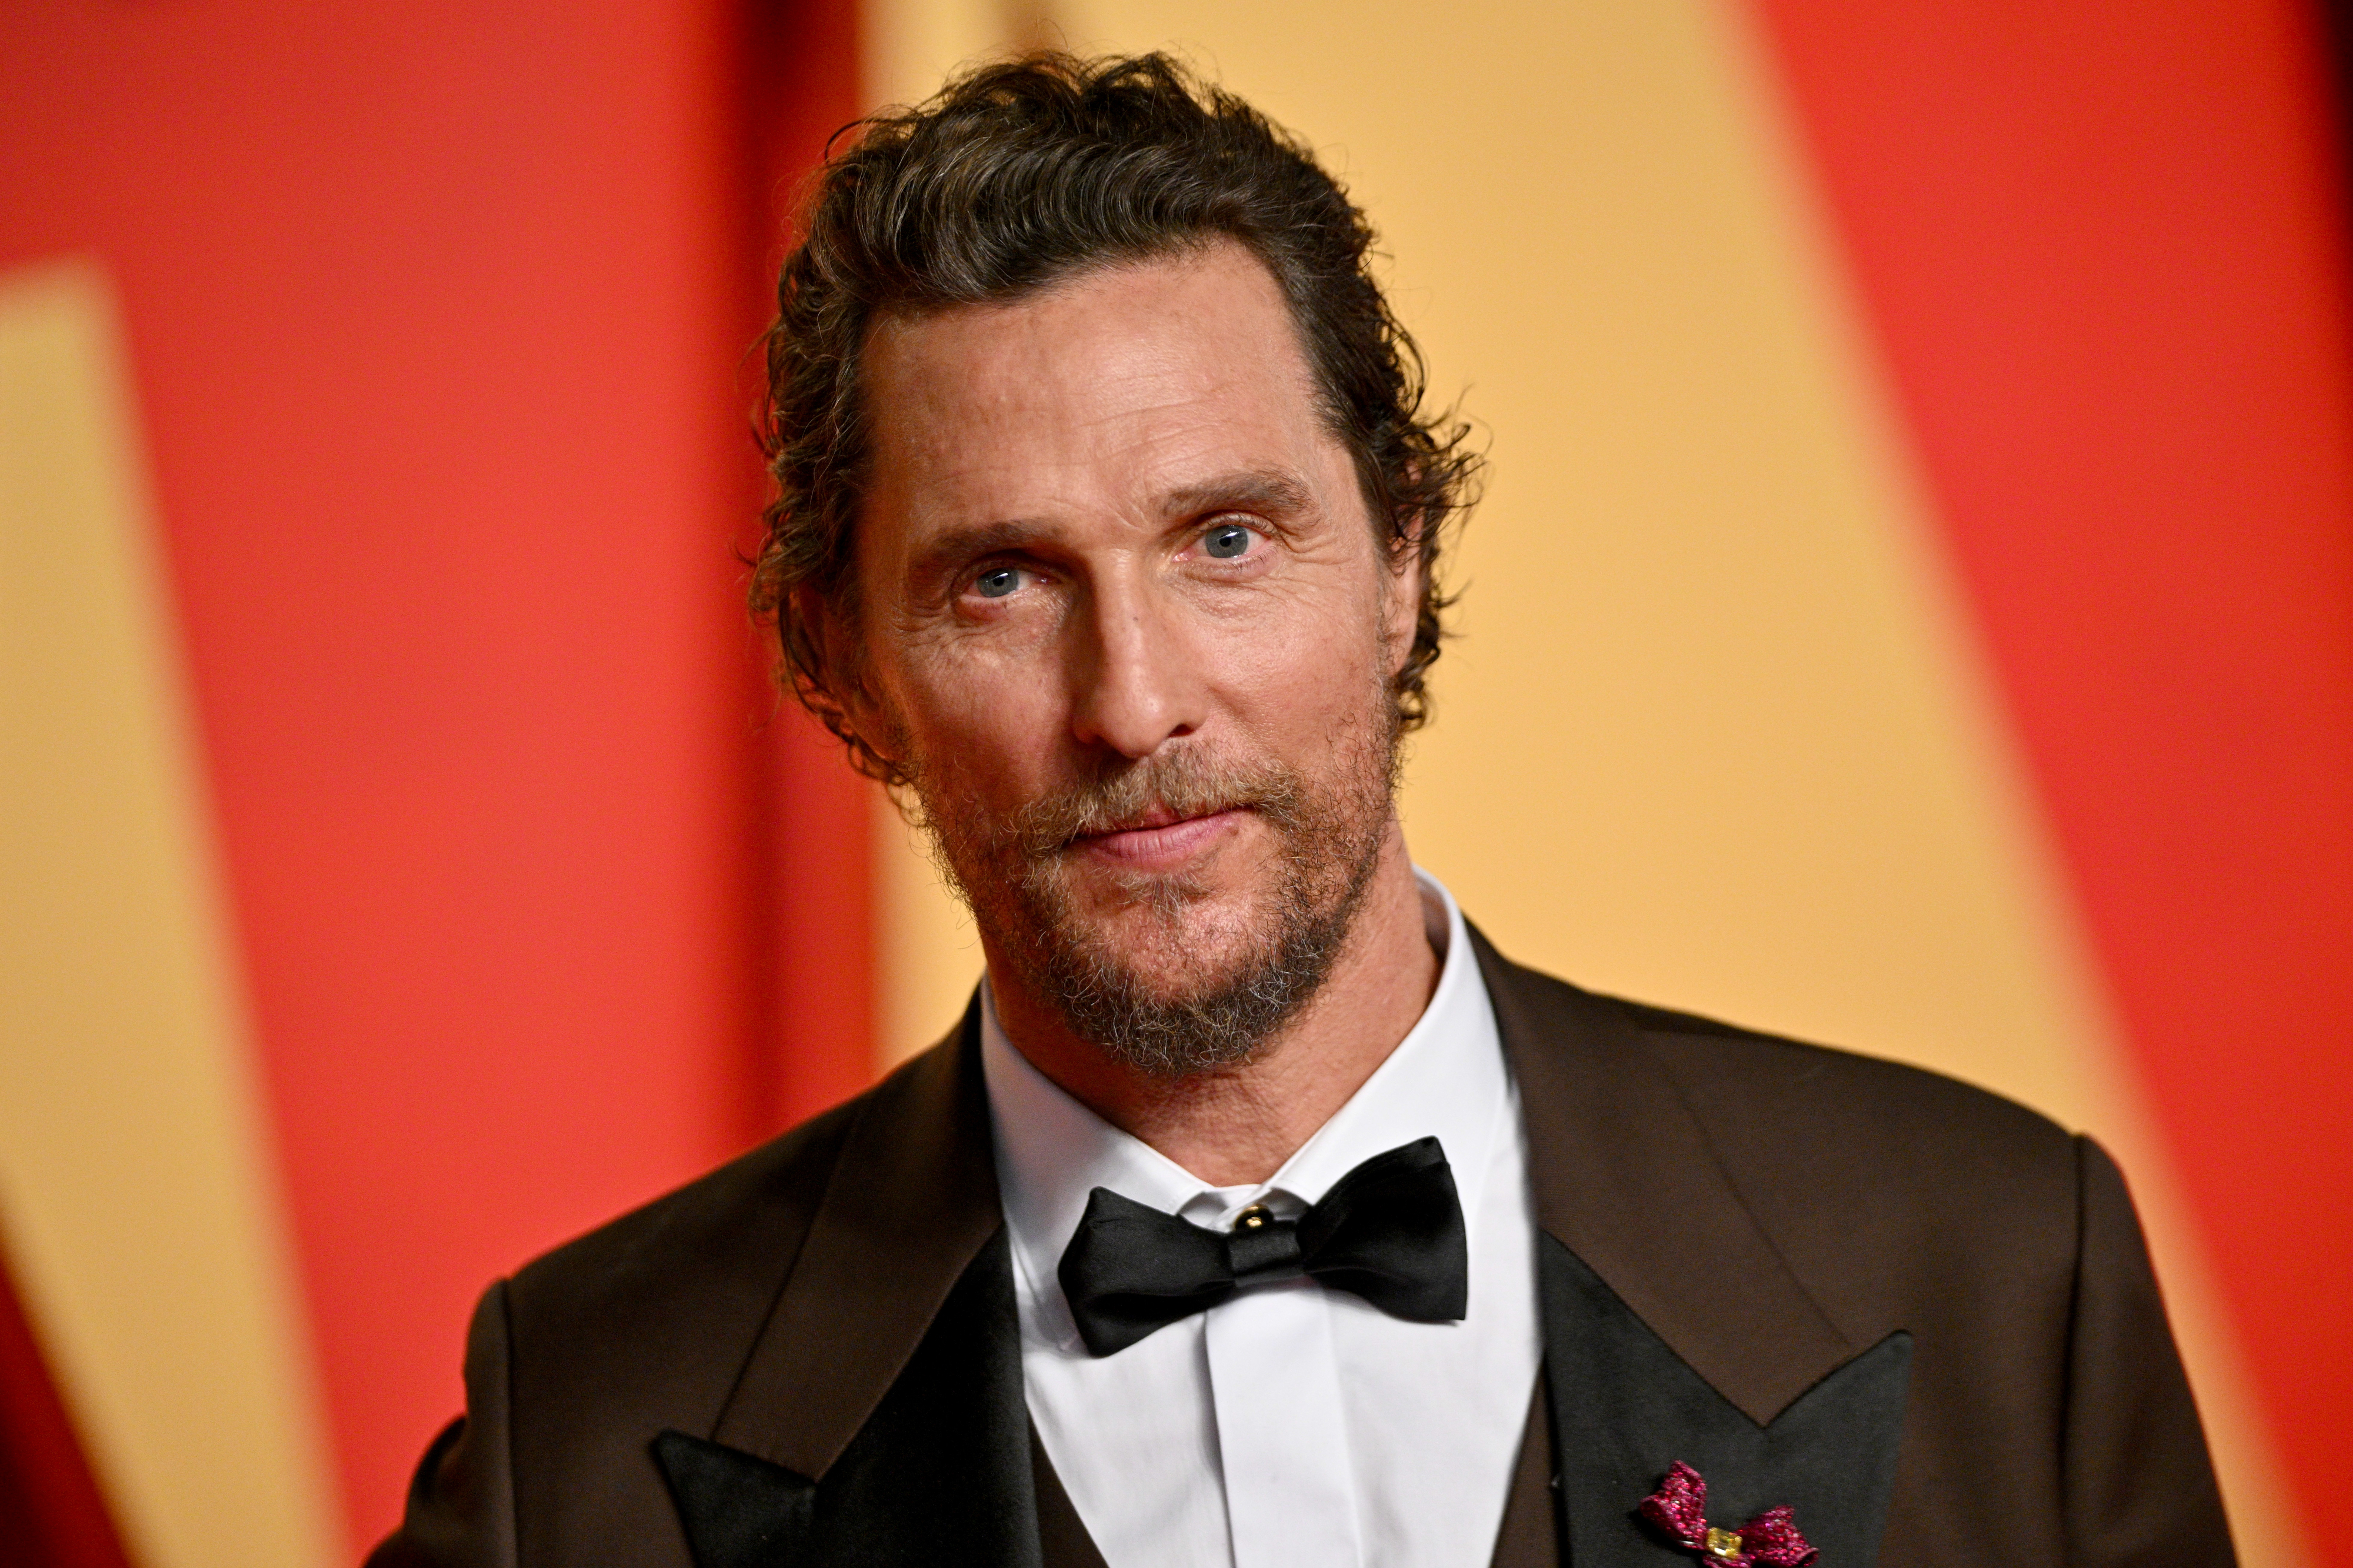 Matthew McConaughey wearing a suit with a bow tie, looking away from camera